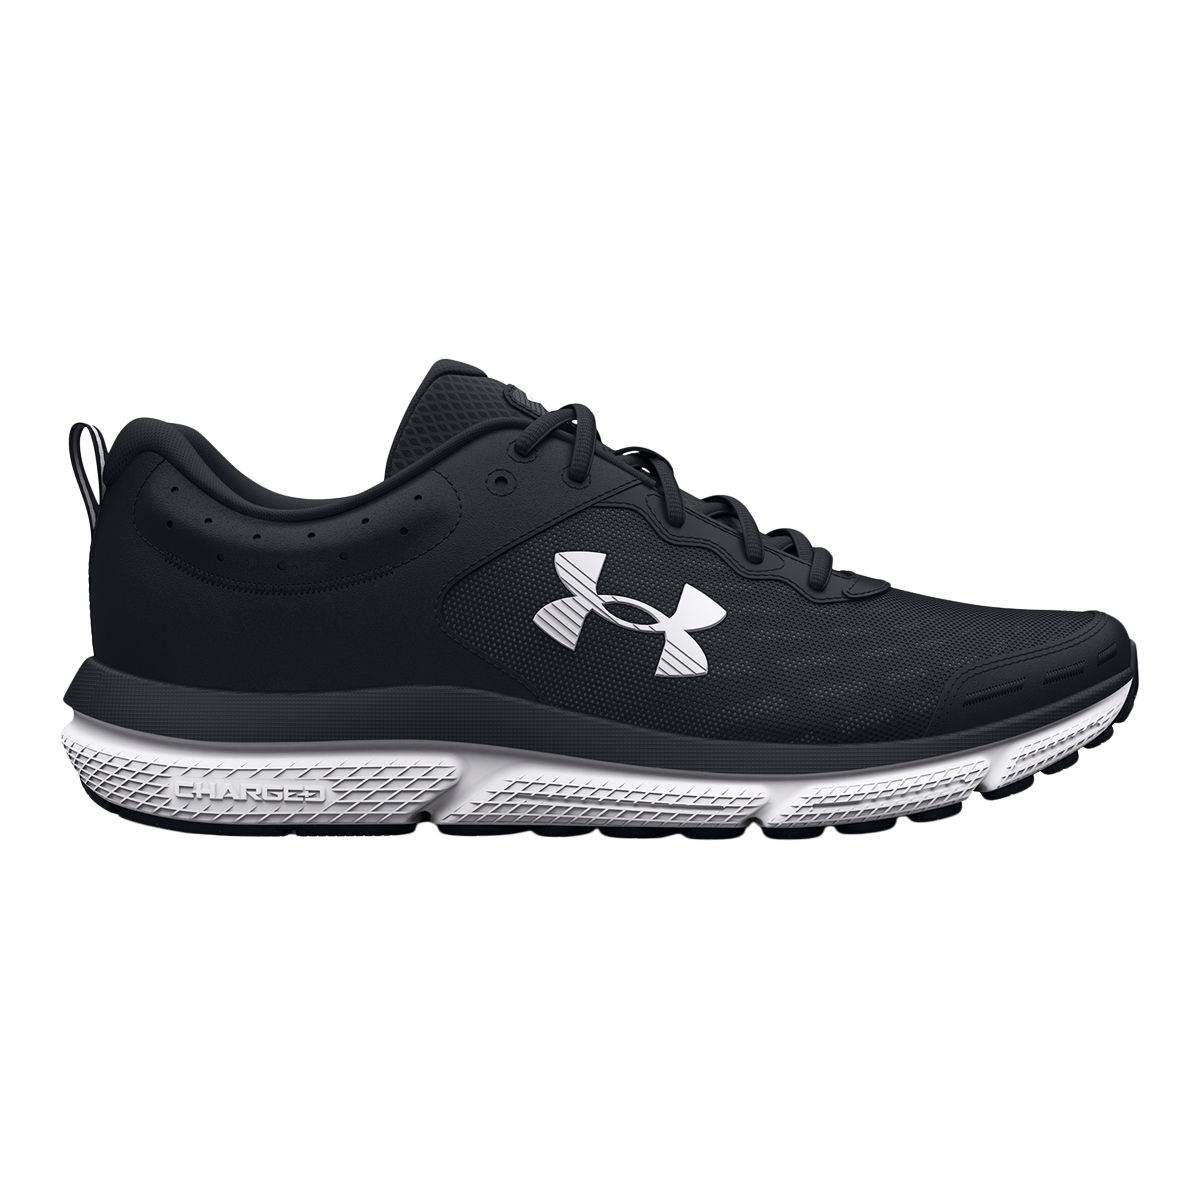 Under Armour Women's Charged Assert 10 Training Shoes | Sportchek